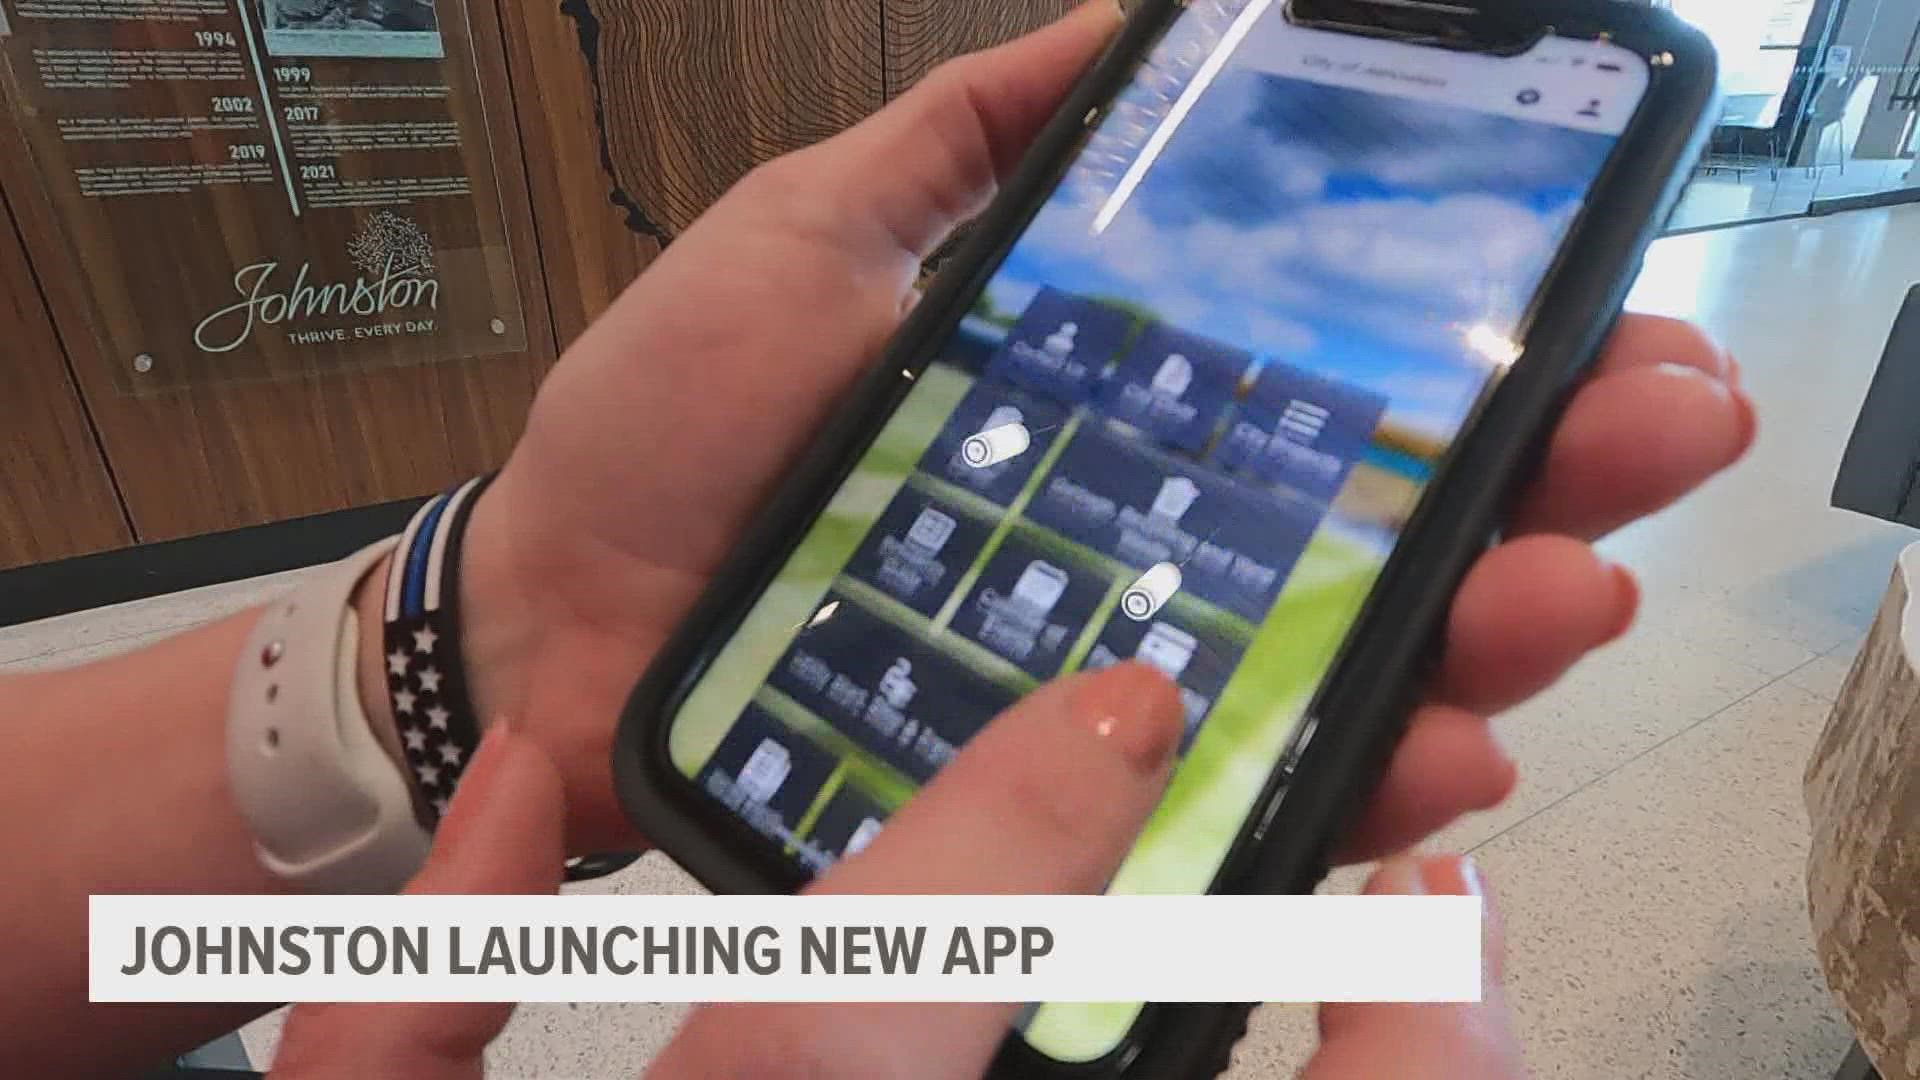 The City of Johnston is launching a new app and website this week, with the goal of using technology to build community engagement.